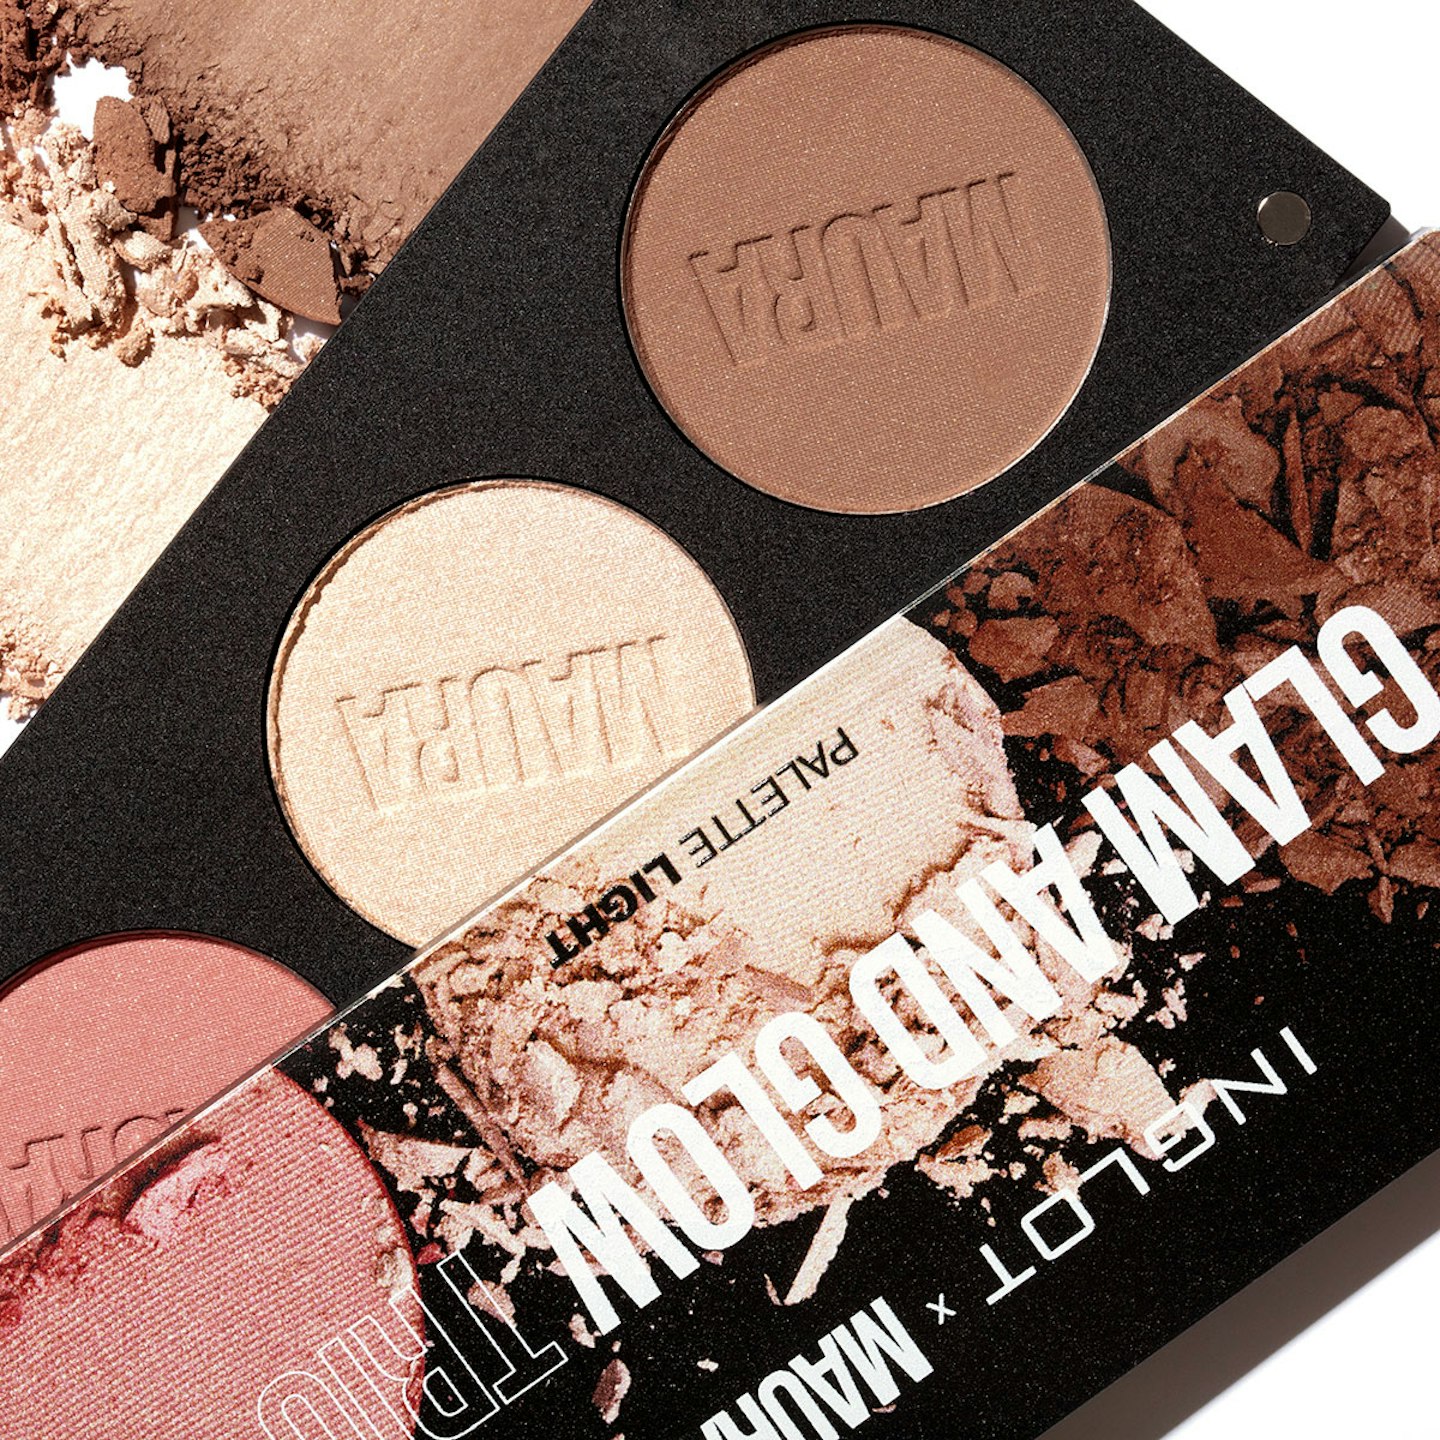 Inglot X Maura Glam and Glow Trio Palette in Light, £18